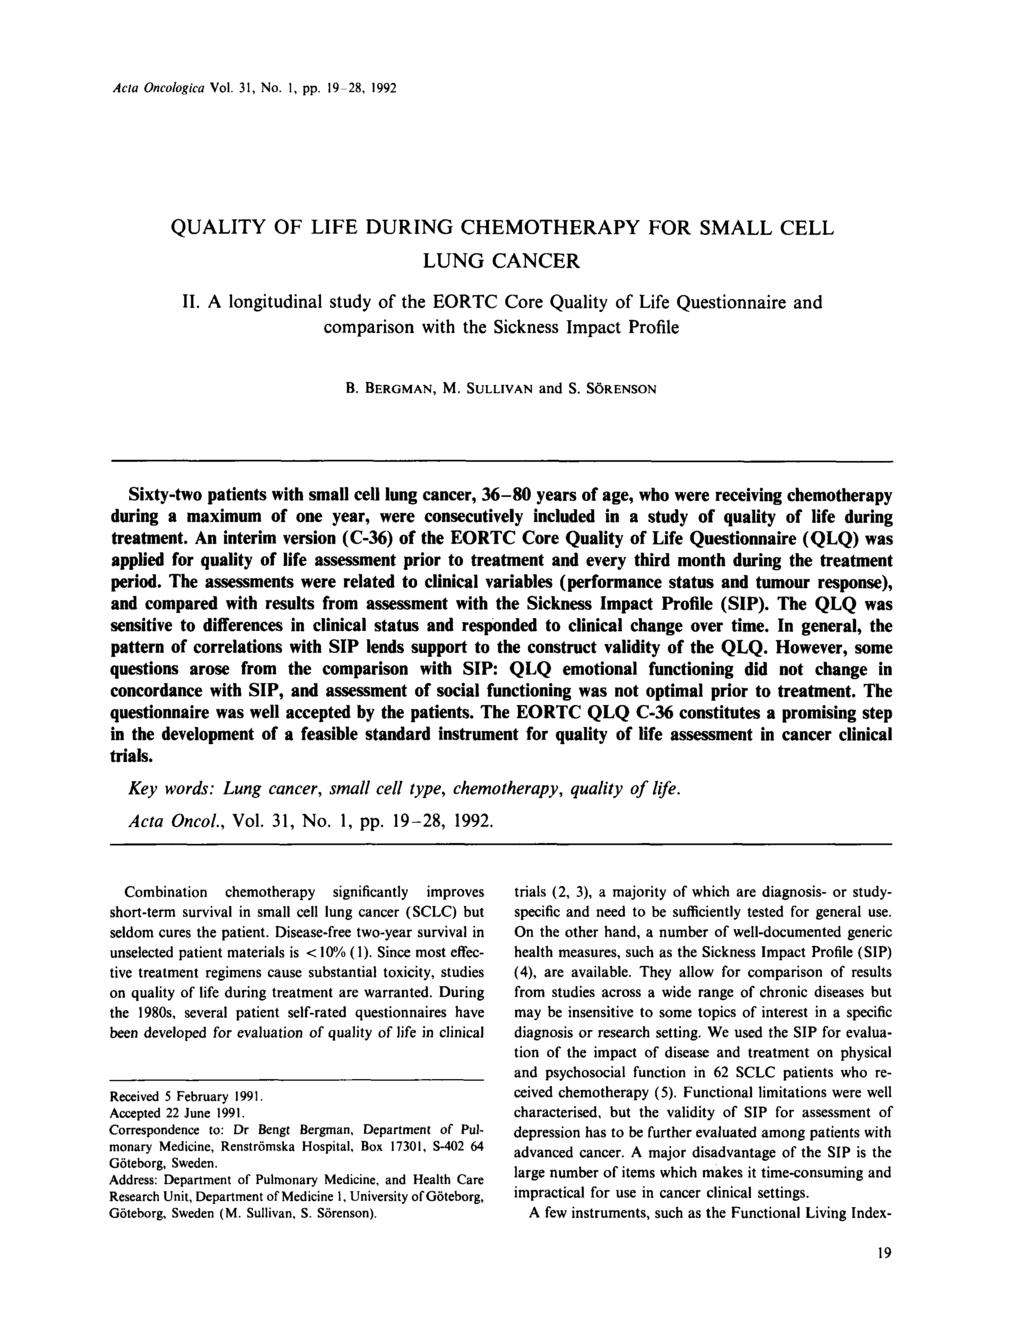 Acta Oncologica Vol. 31, No., pp. 19-28, 1992 QUALTY OF LFE DURNG CHEMOTHERAPY FOR SMALL CELL LUNG CANCER 11.